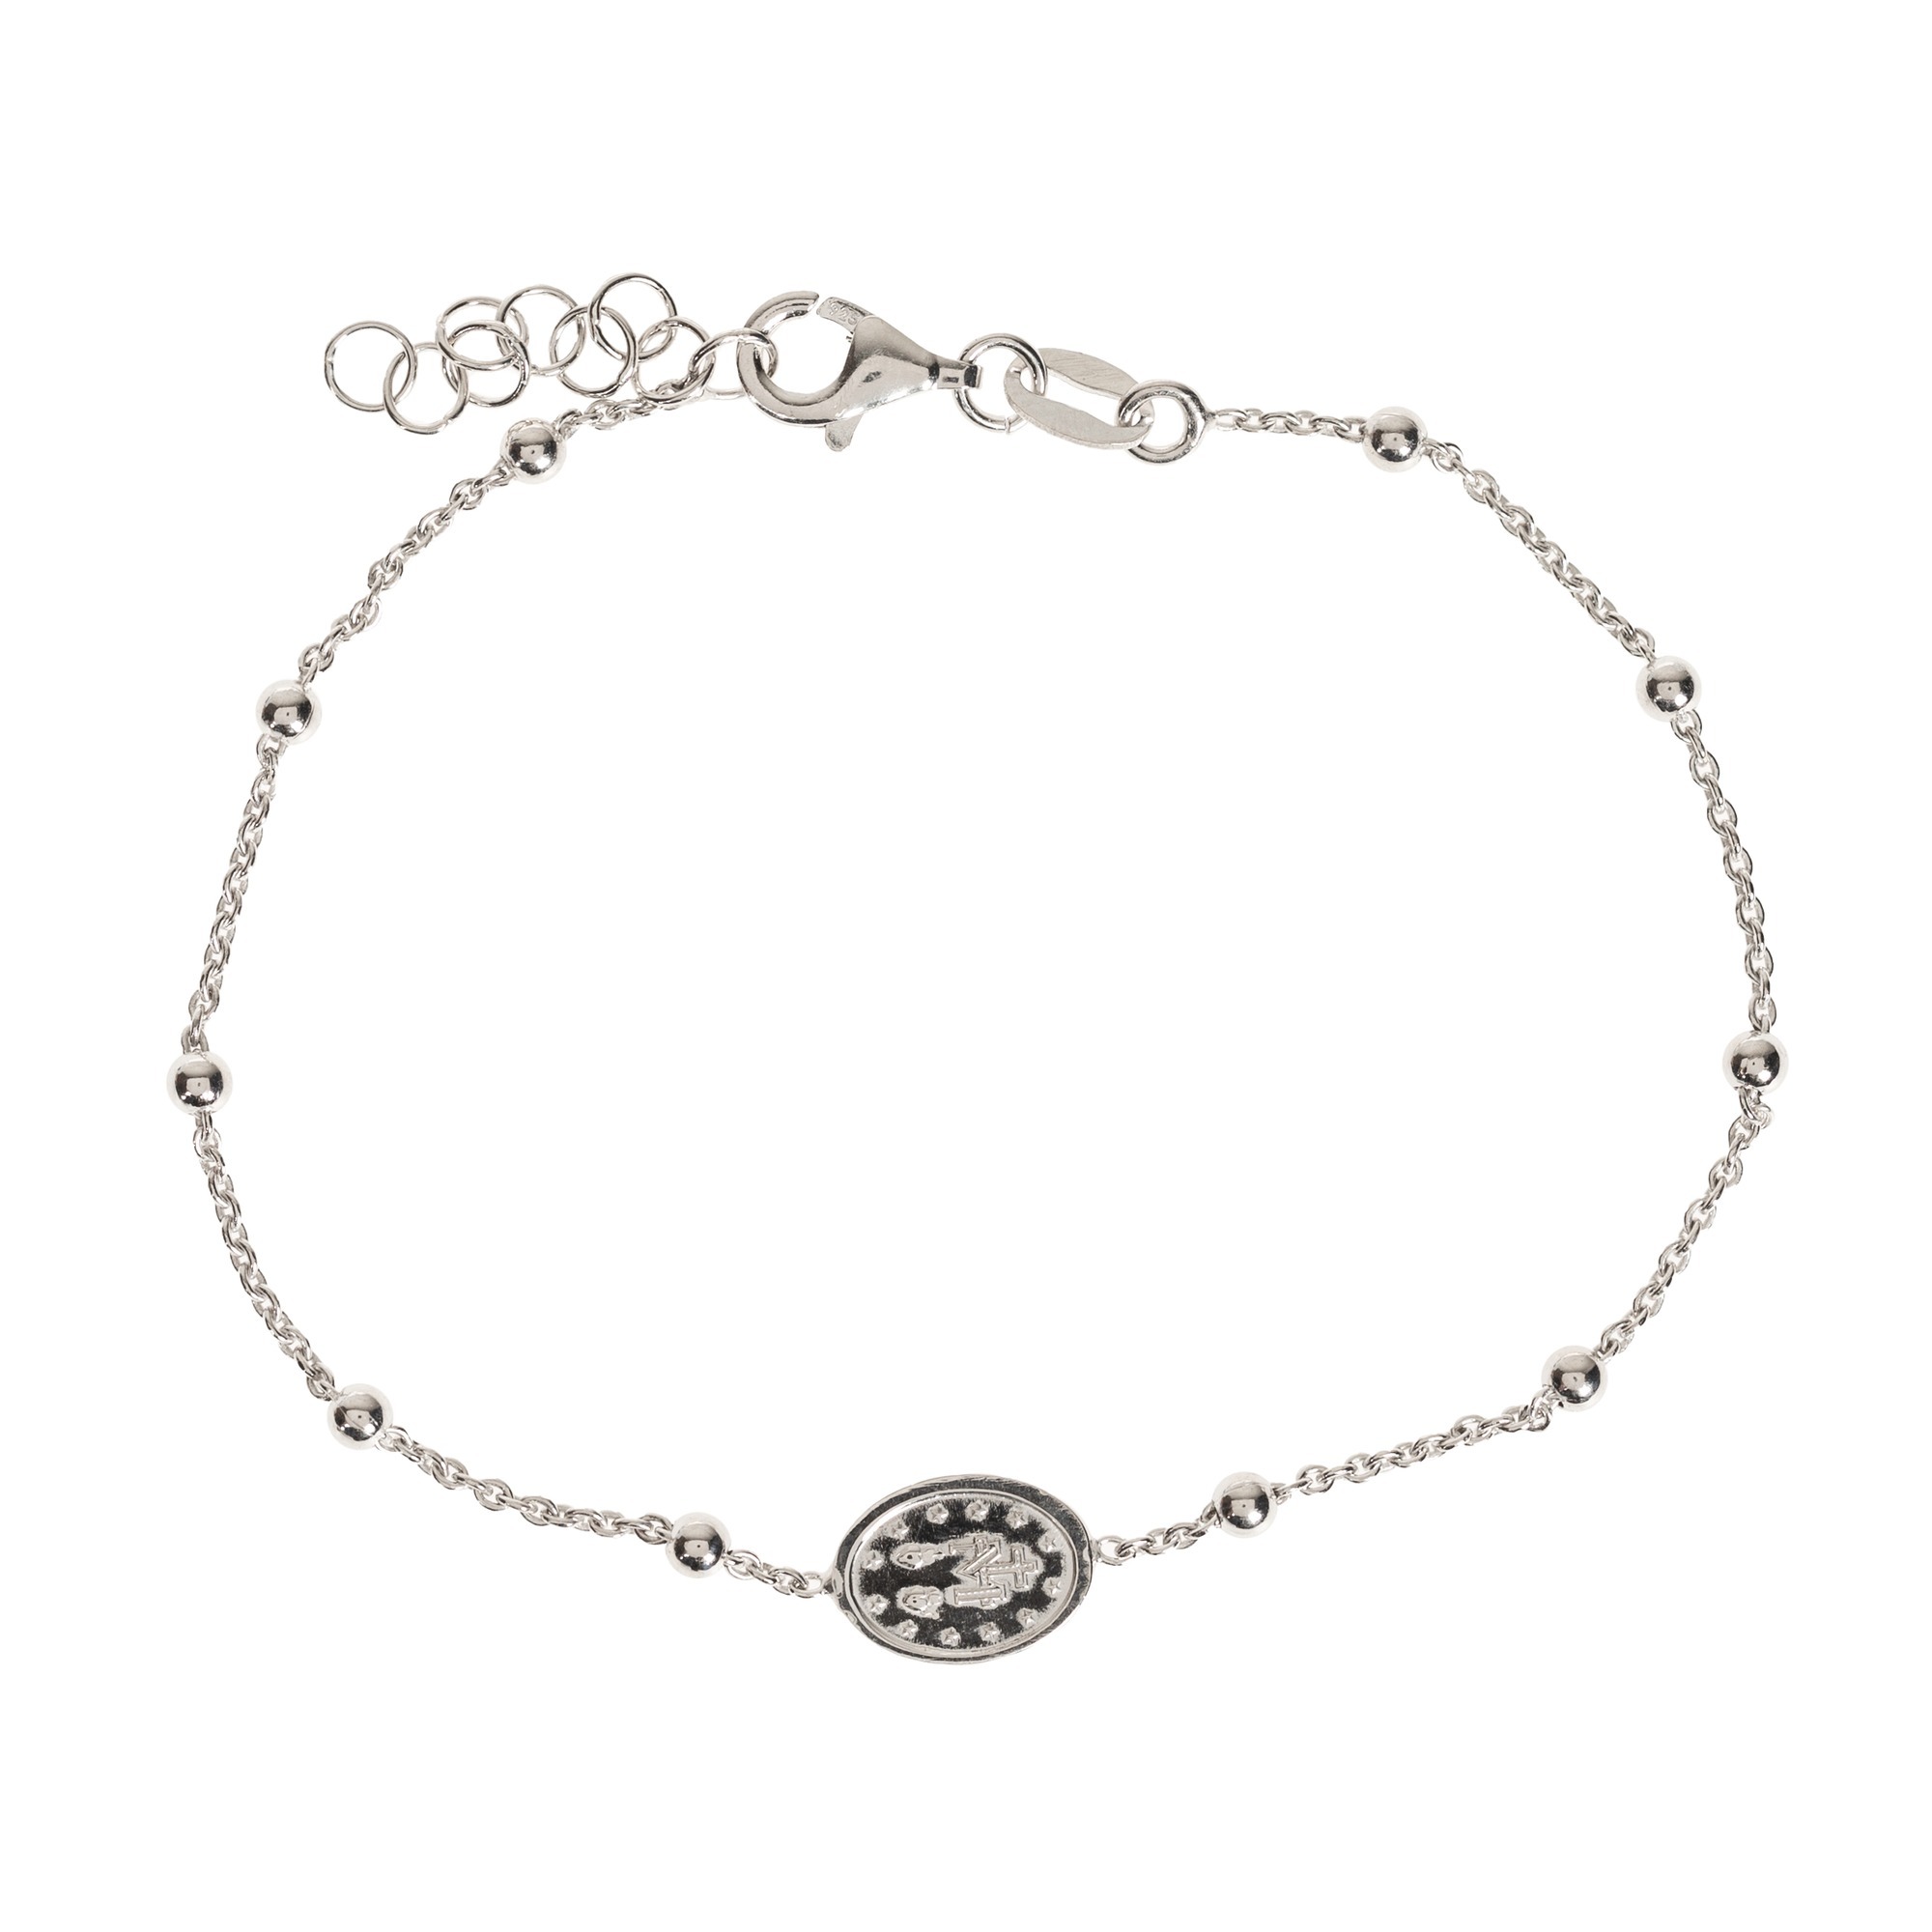 Delicate Sterling Silver Rosary Bracelet | The Catholic Company®